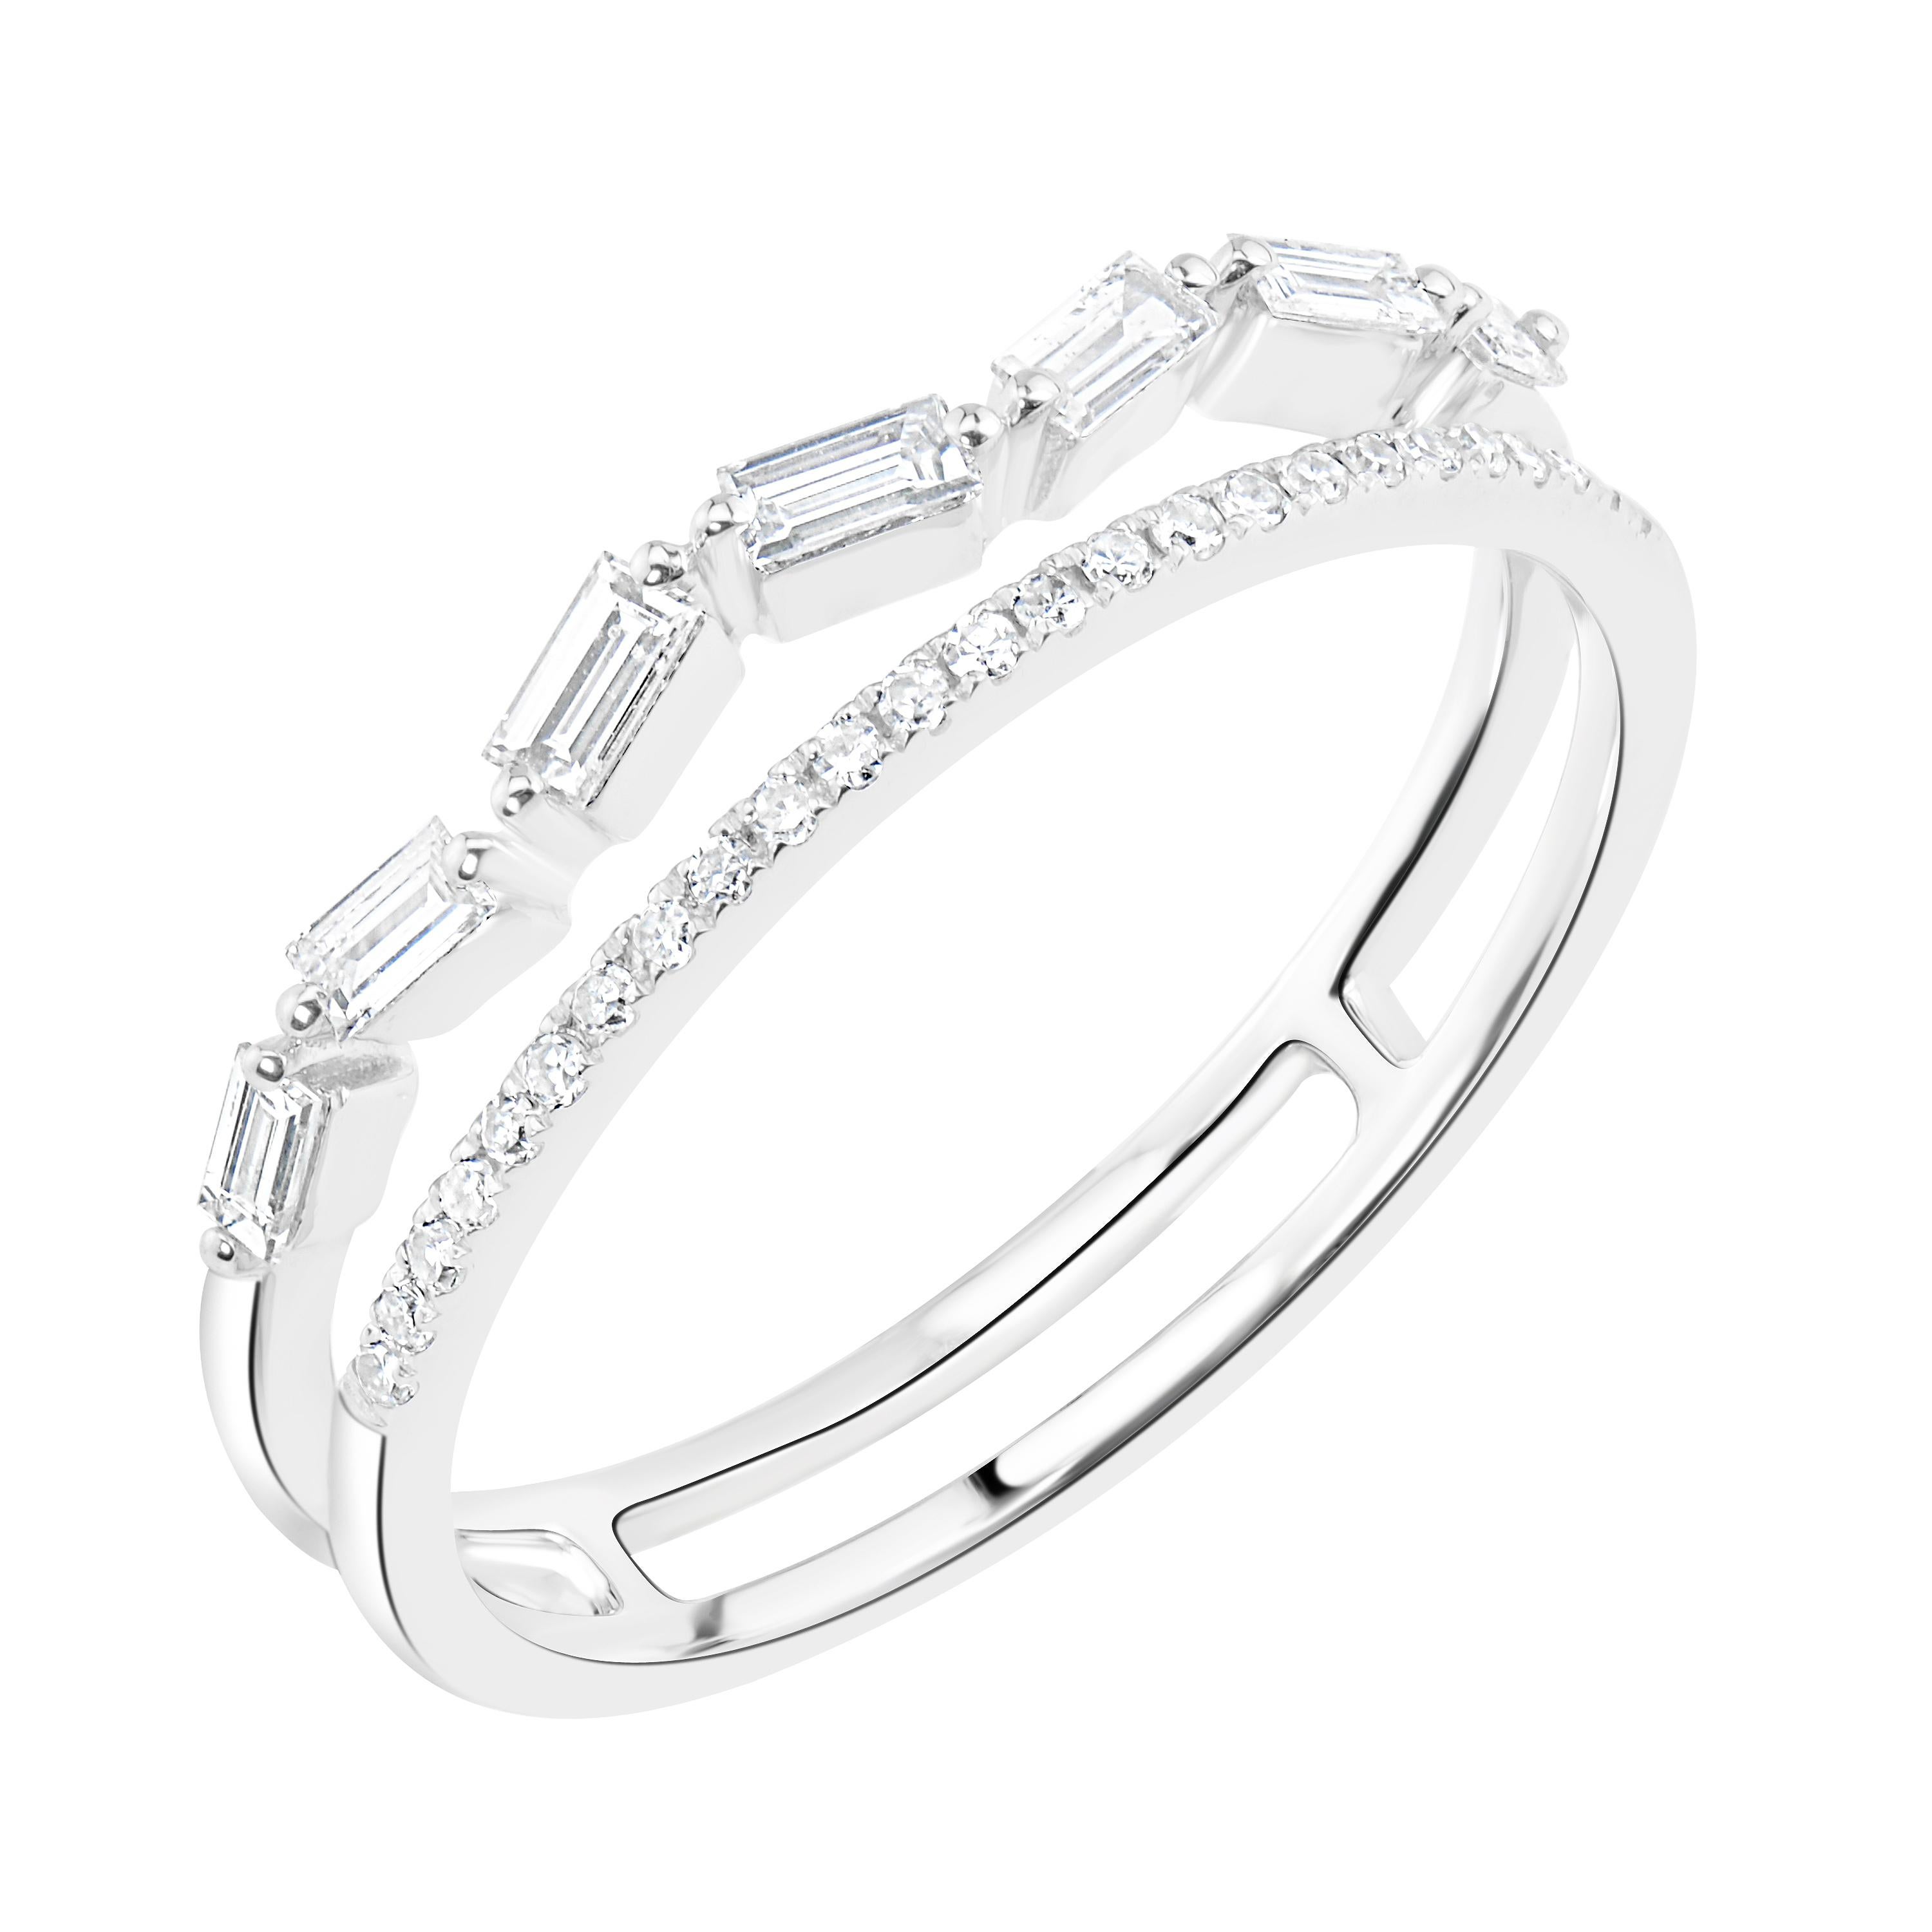 This Luxle Split Shank Band Ring hosts a beautiful display of sparkle. Rendered in 14K white gold, this band ring dazzles with 6 baguette diamonds and 25 pave set round diamonds in a chic split shank design. This white gold ring is showcased with